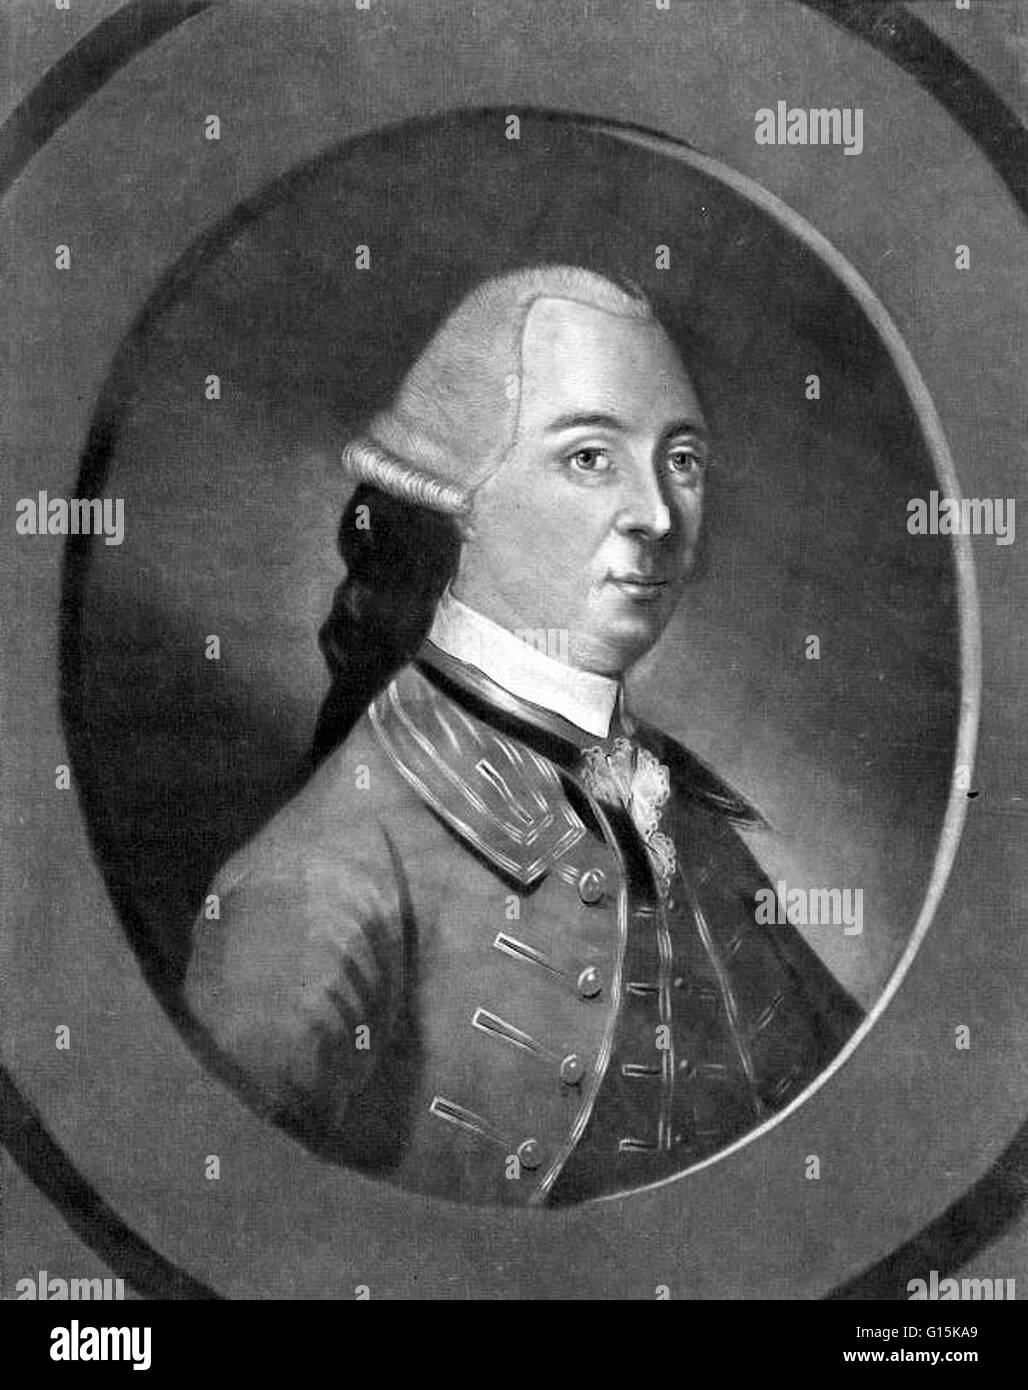 John Hancock (1737-1793) was a merchant, statesman, and prominent Patriot of the American Revolution. Before the American Revolution, Hancock was one of the wealthiest men in the Thirteen Colonies and he used that wealth to support the colonial cause. Han Stock Photo